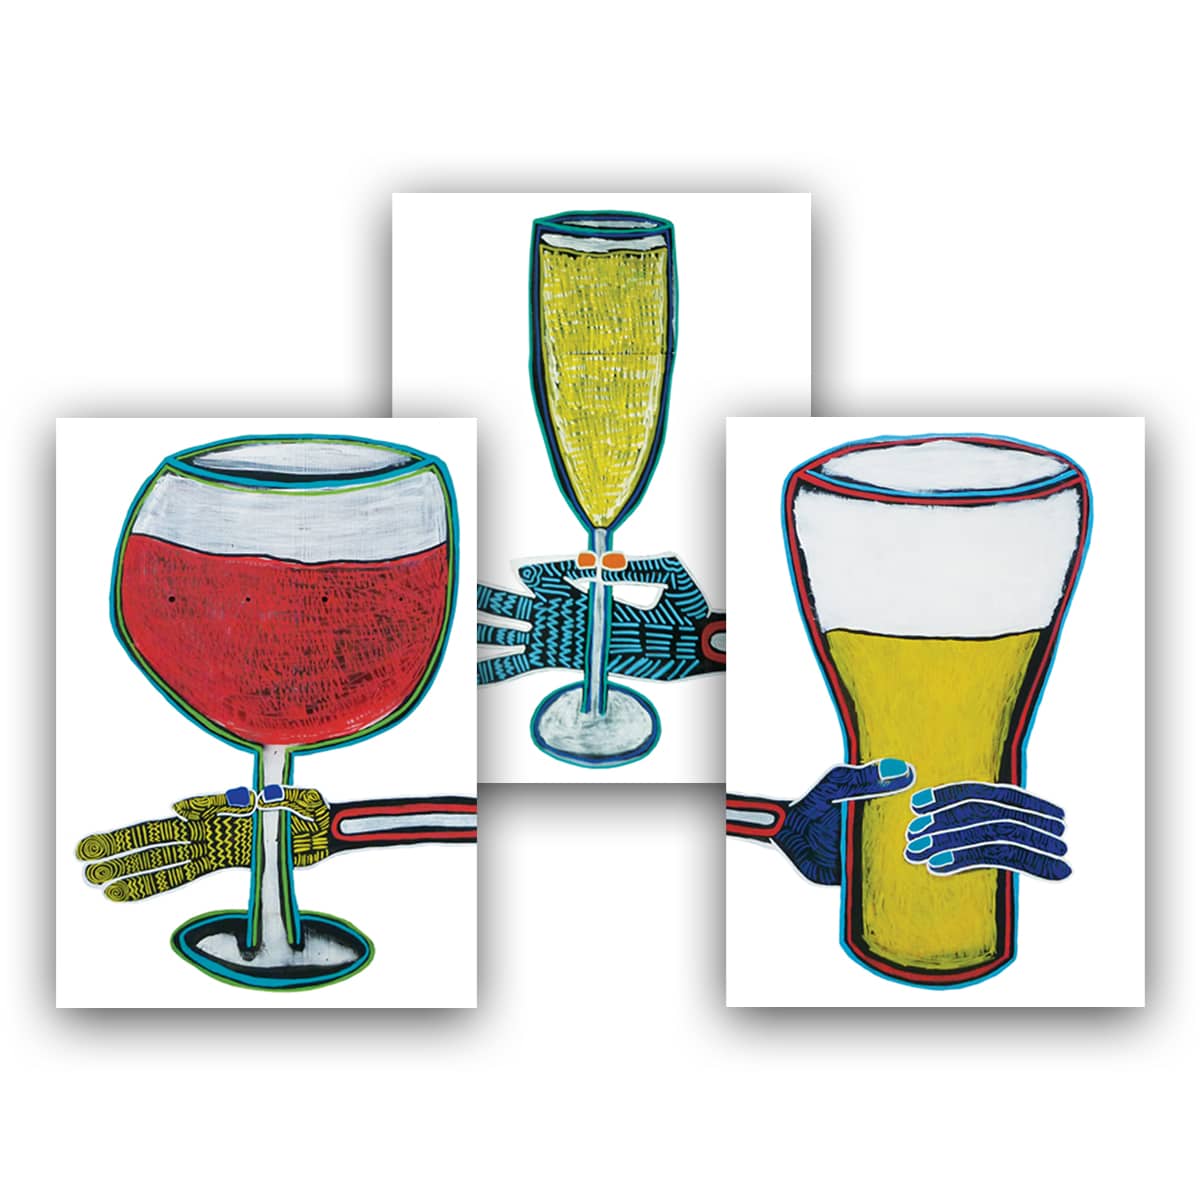 CHEERS! - postcard A6 - Frank Willems